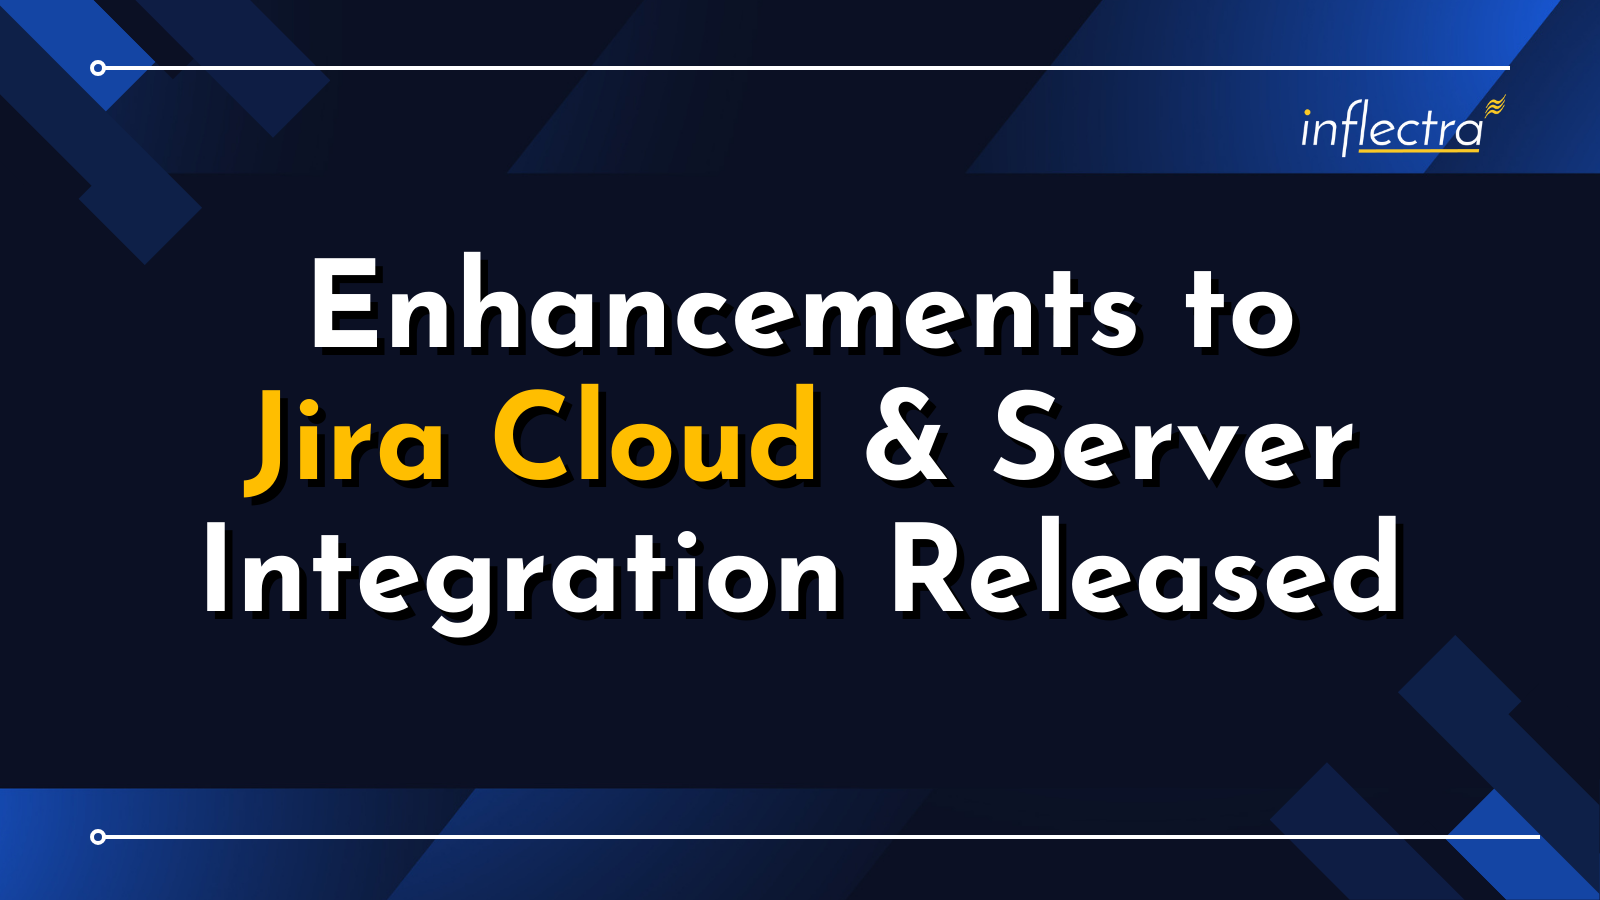 enhancements-to-jira-cloud-and-server-integration-released-image